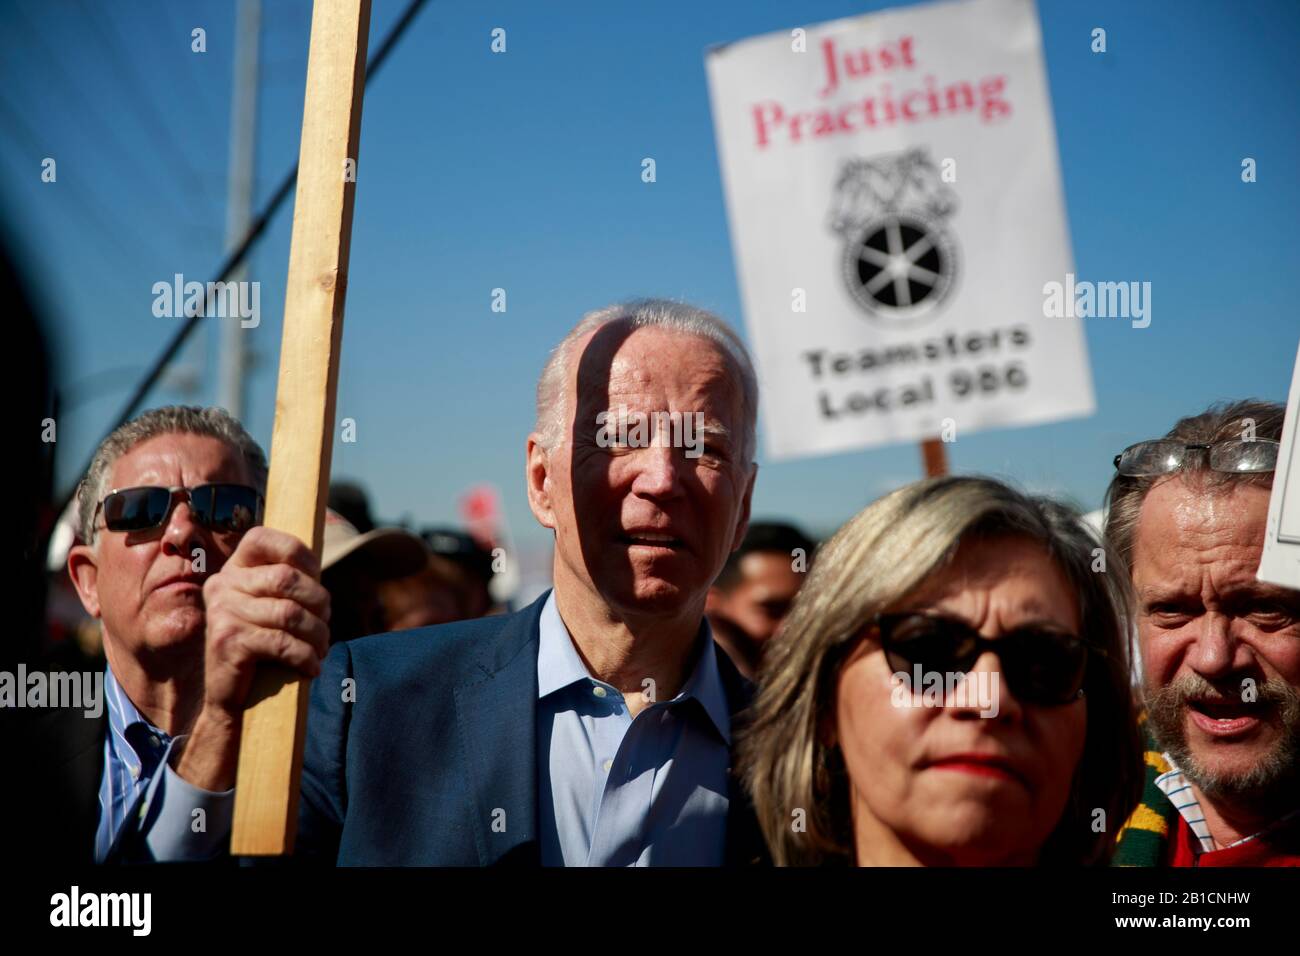 02192020 - Las Vegas, Nevada, USA: Former Vice President and democratic presidential candidate hopeful Joe Biden campaigns on the picket line with members of the Culinary Workers Union Local 226 outside the Palms Casino in Las Vegas, Wednesday, Feb. 19, 2020. Stock Photo